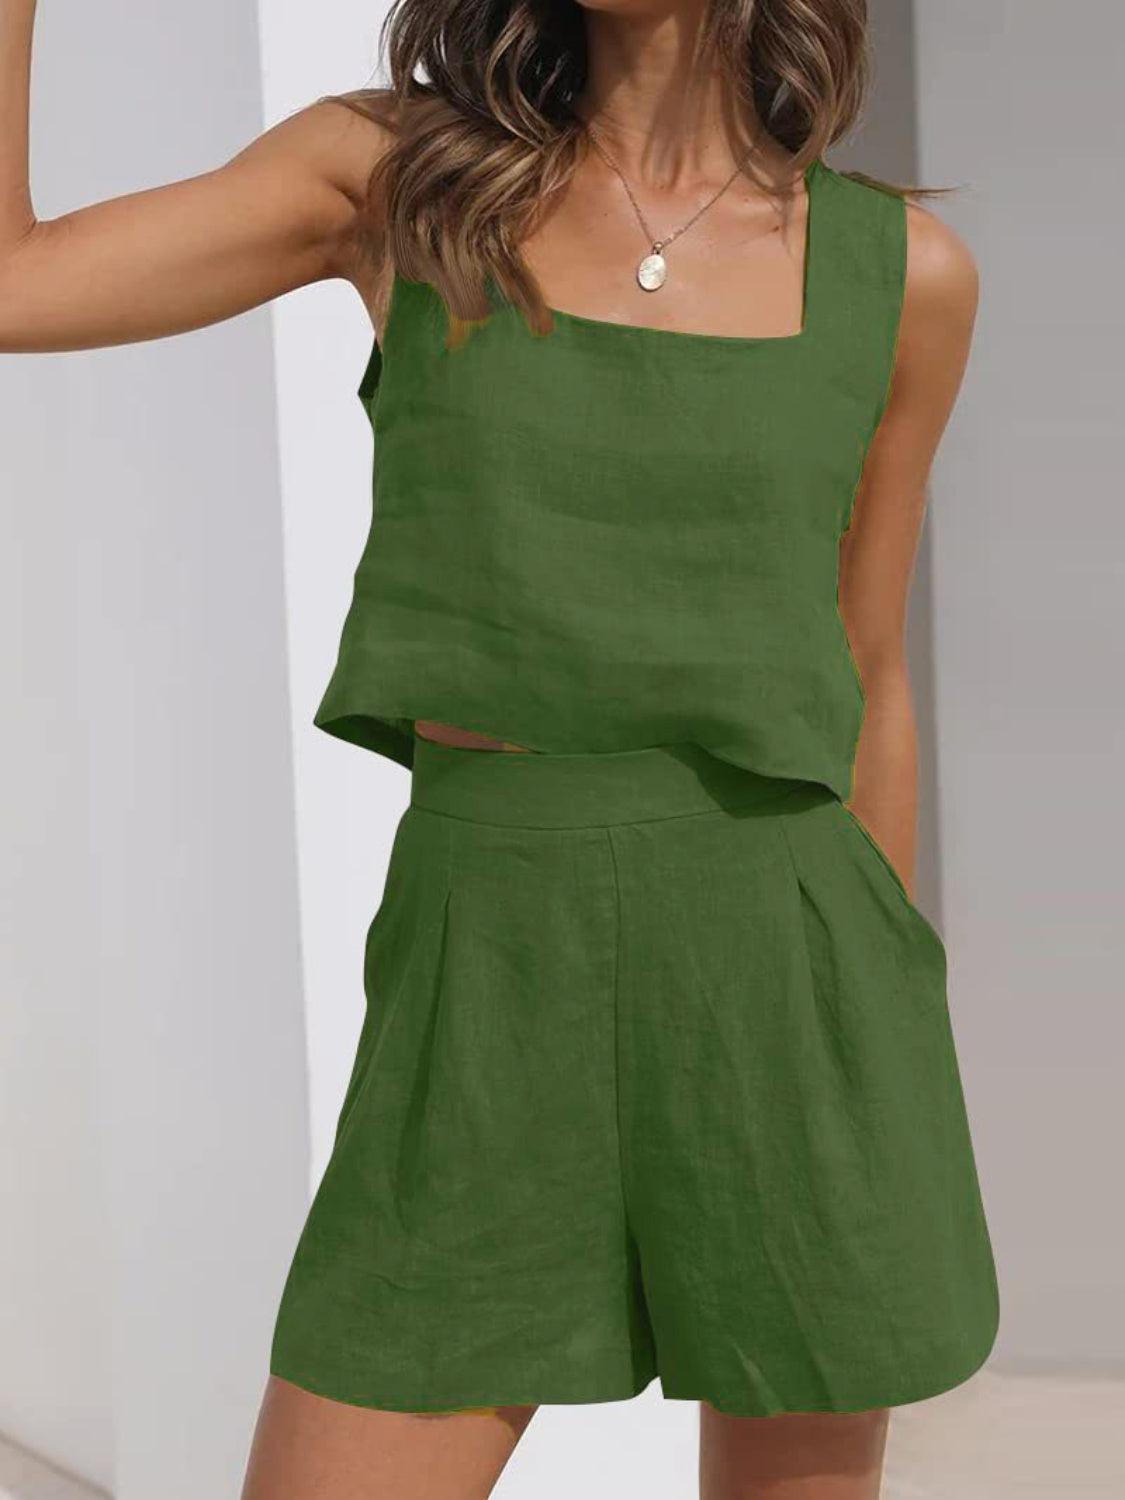 a woman wearing a green top and shorts